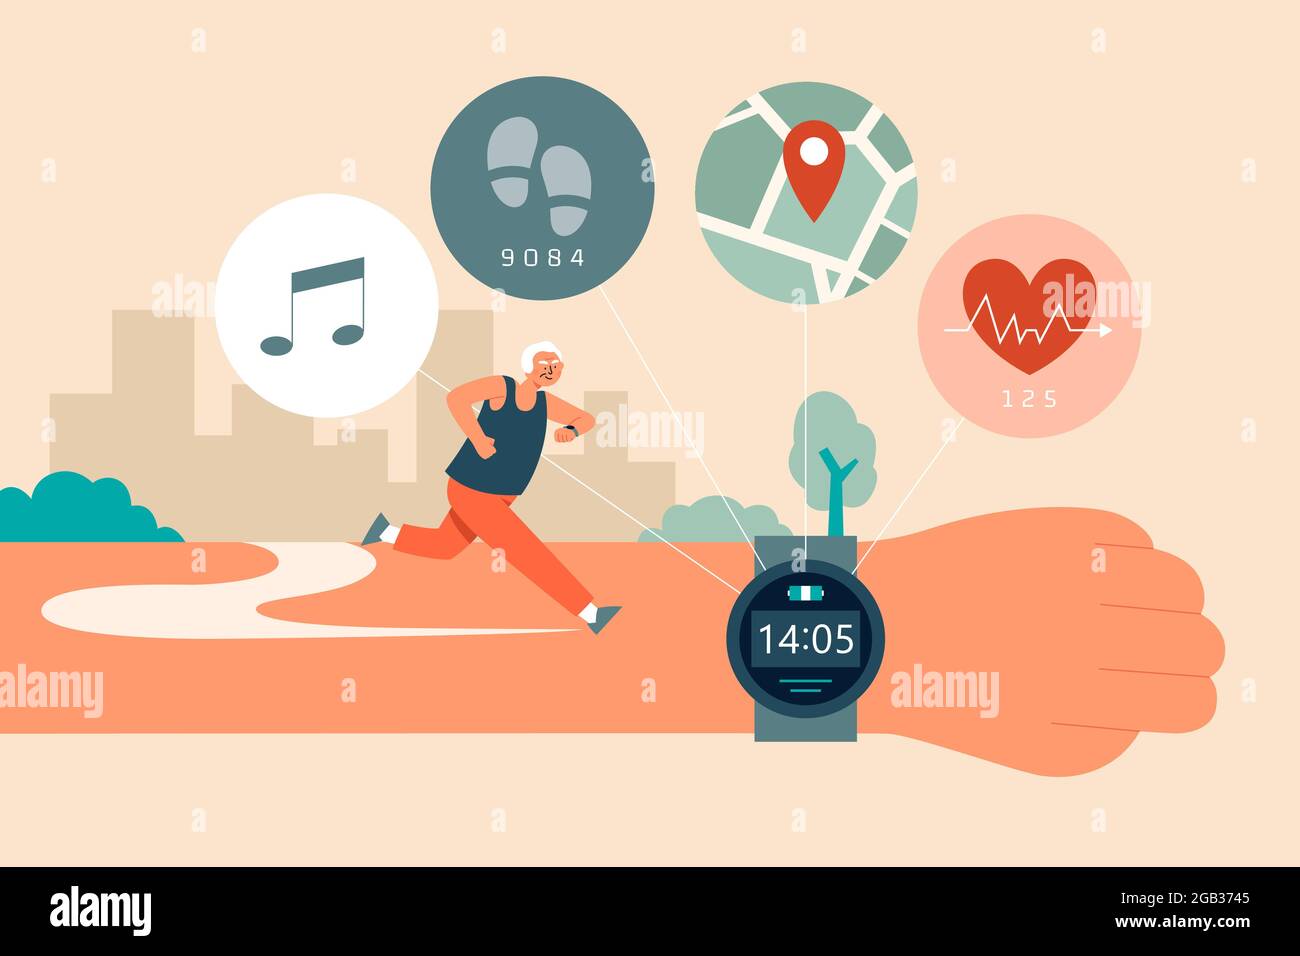 Flat illustration of a senior man wearing a fitness tracker watch with pedometer, heart rate sensor, GPS, and music app while running outdoor Stock Vector